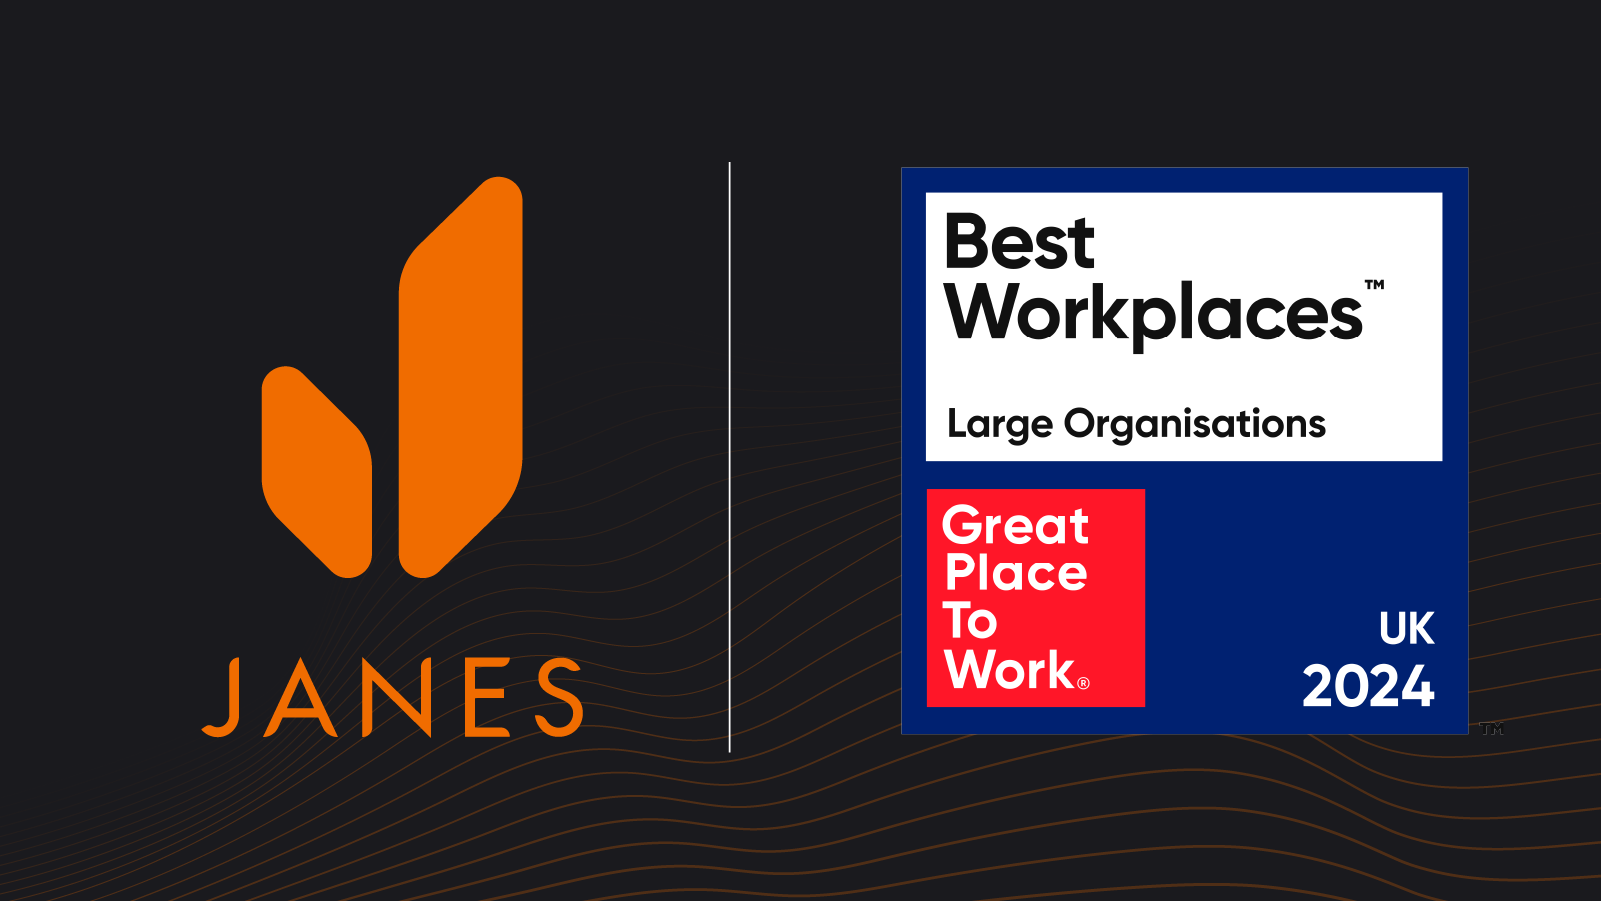 Janes named as one of the UK's Best Workplaces™